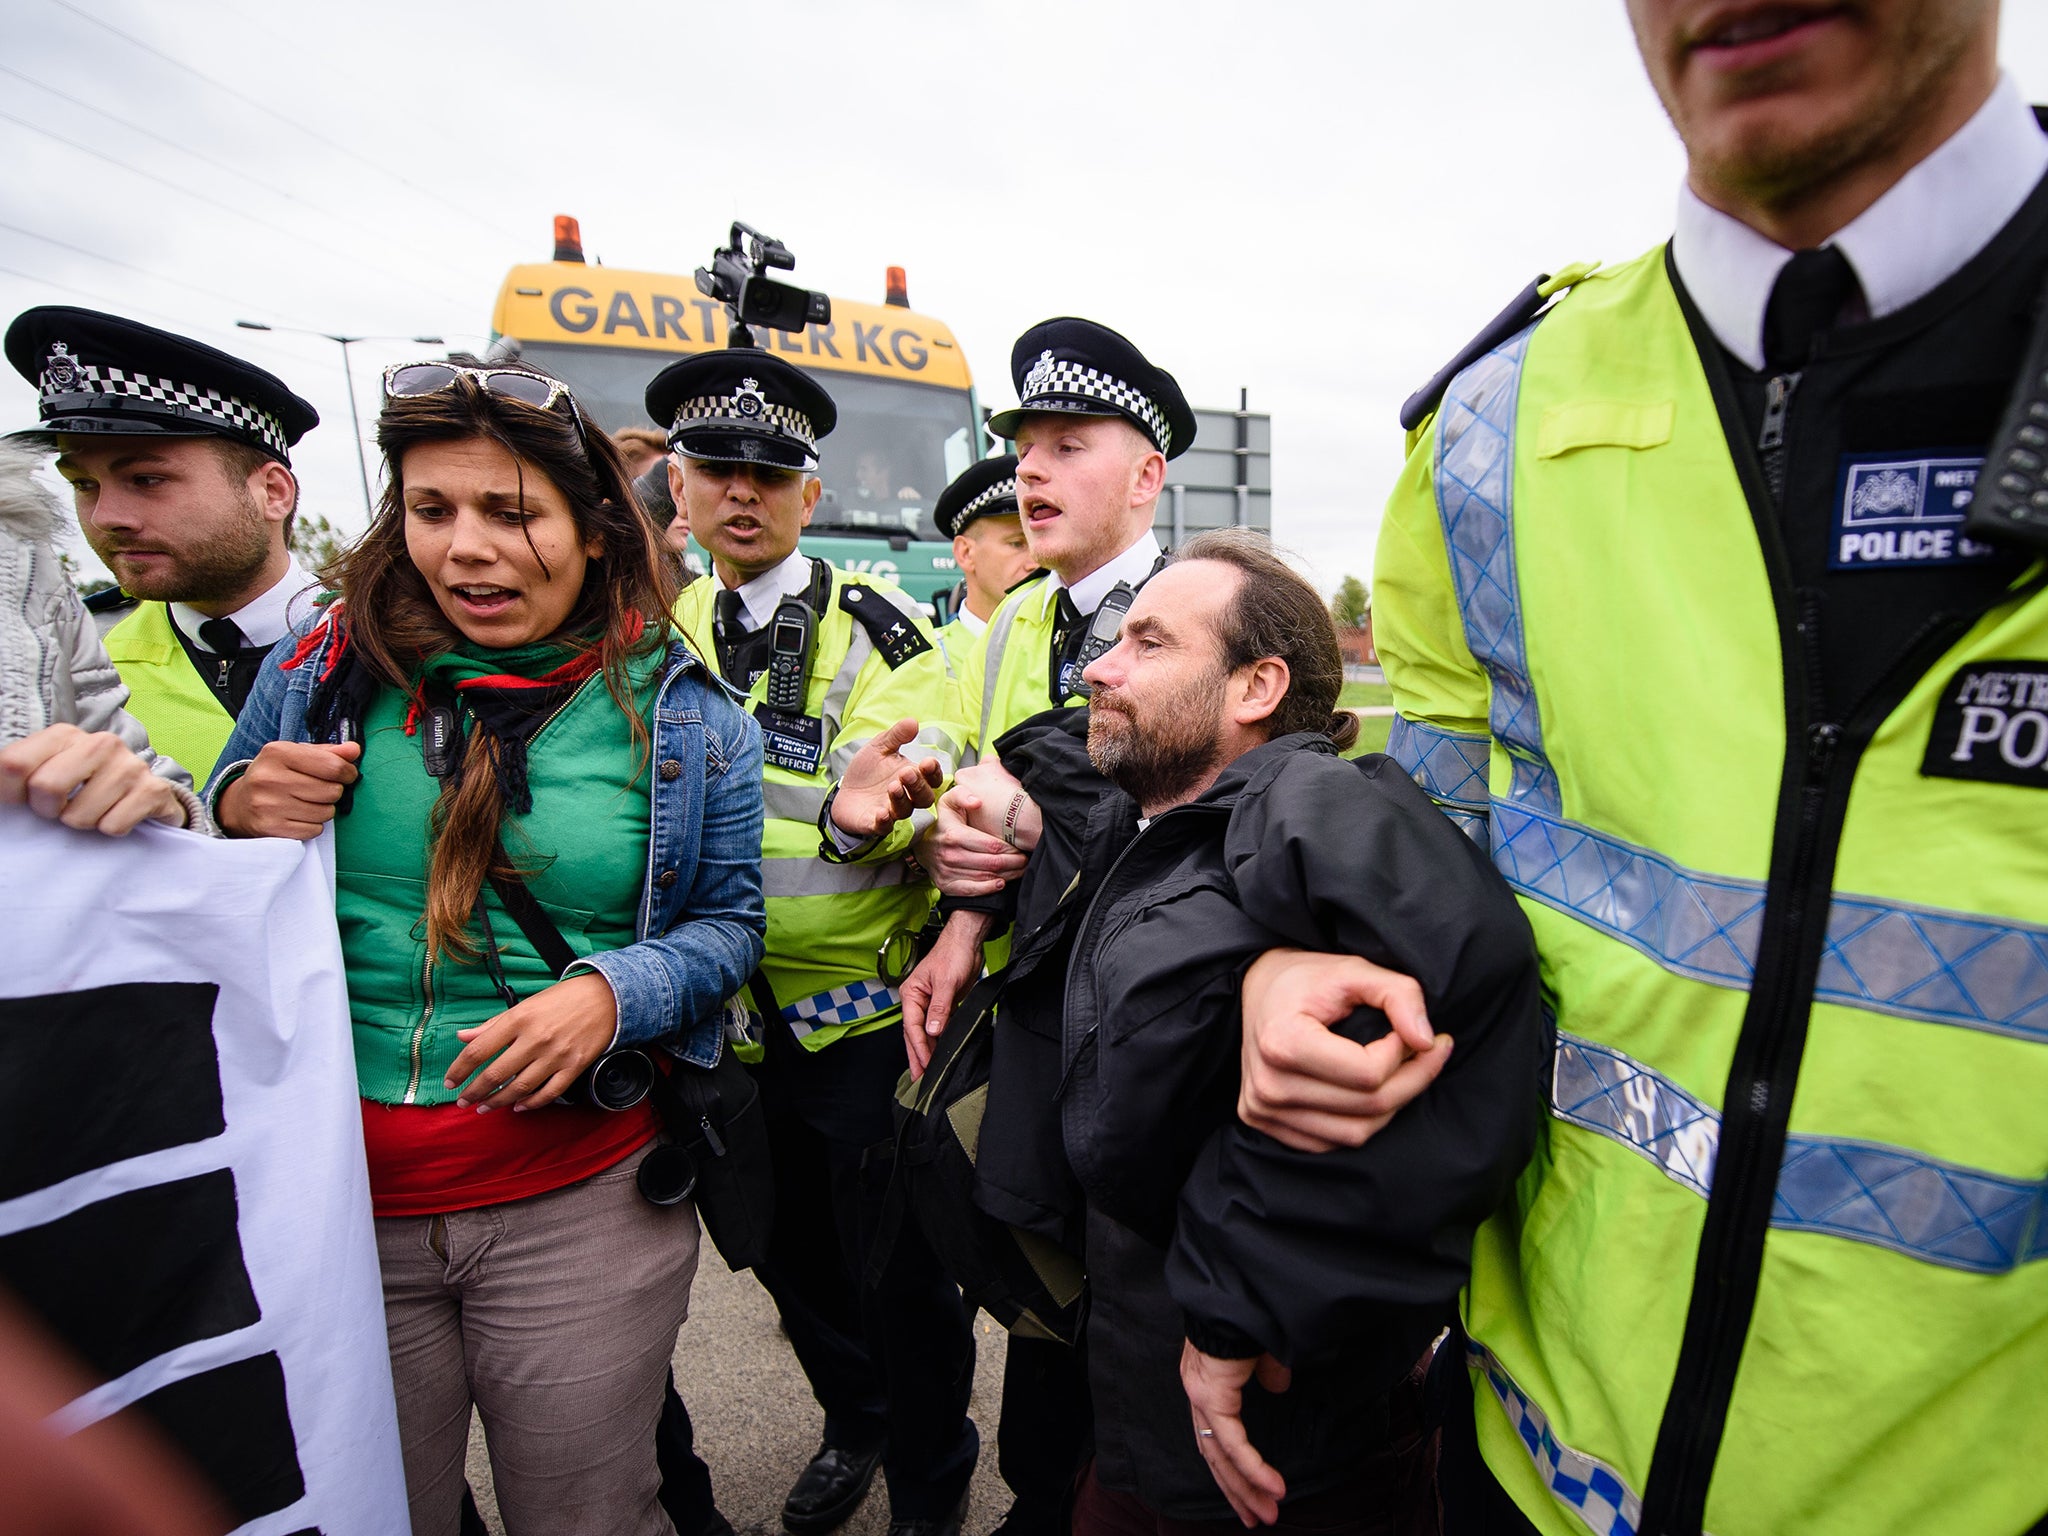 The DSEI arms fair attracts a large number of protesters and an accompanying strong police presence